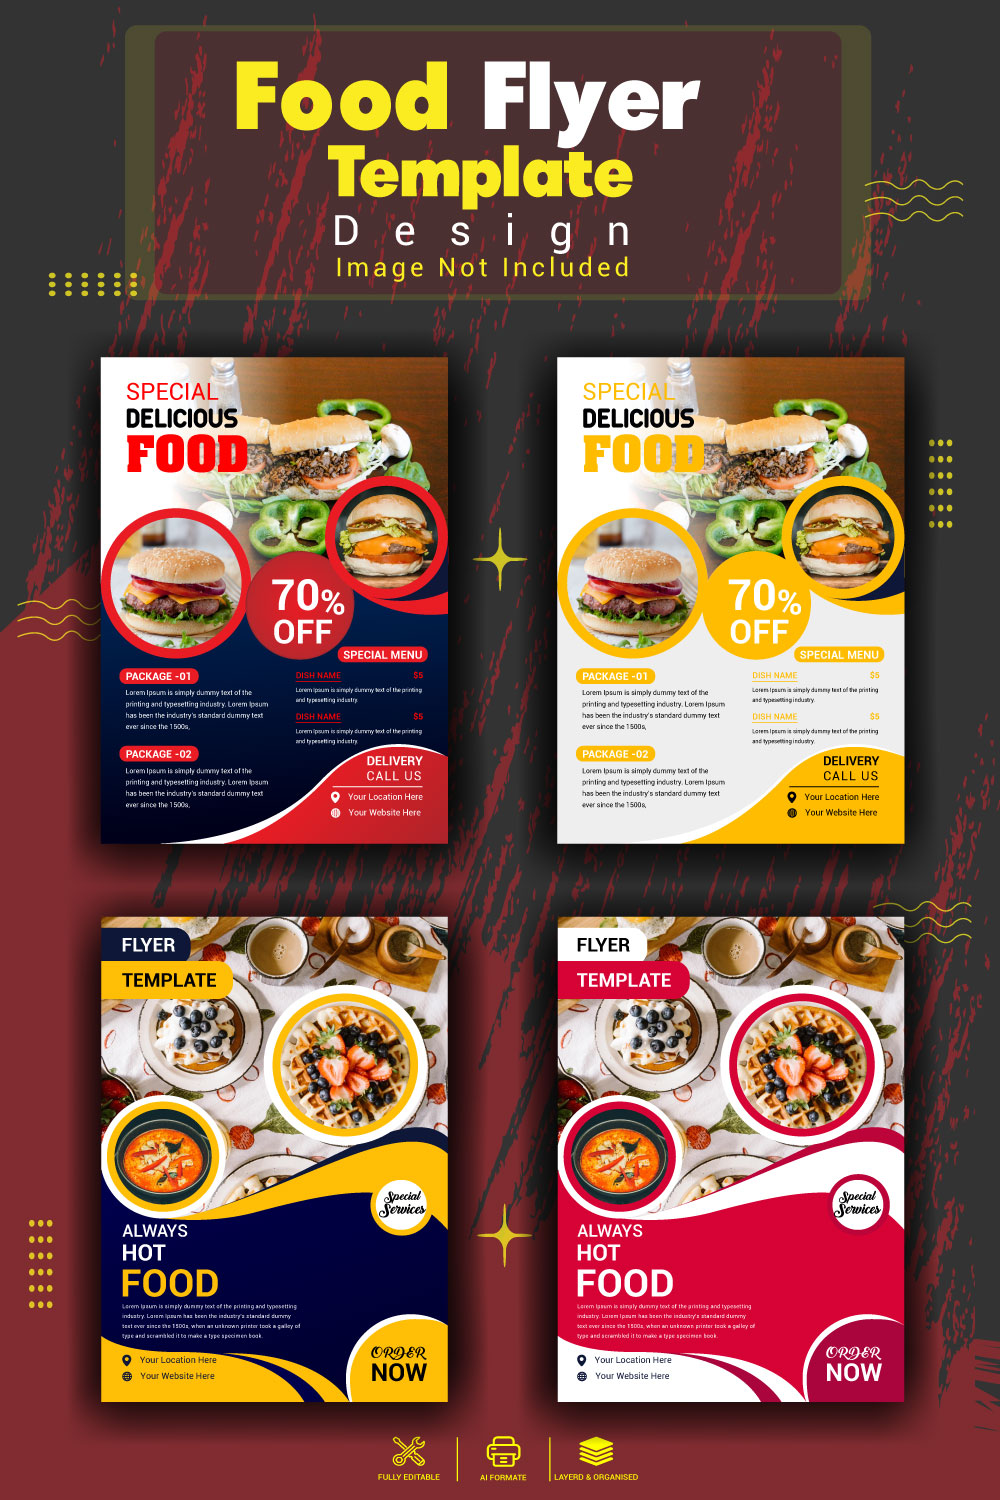 Restaurant food flyer template Design with Burger pinterest preview image.